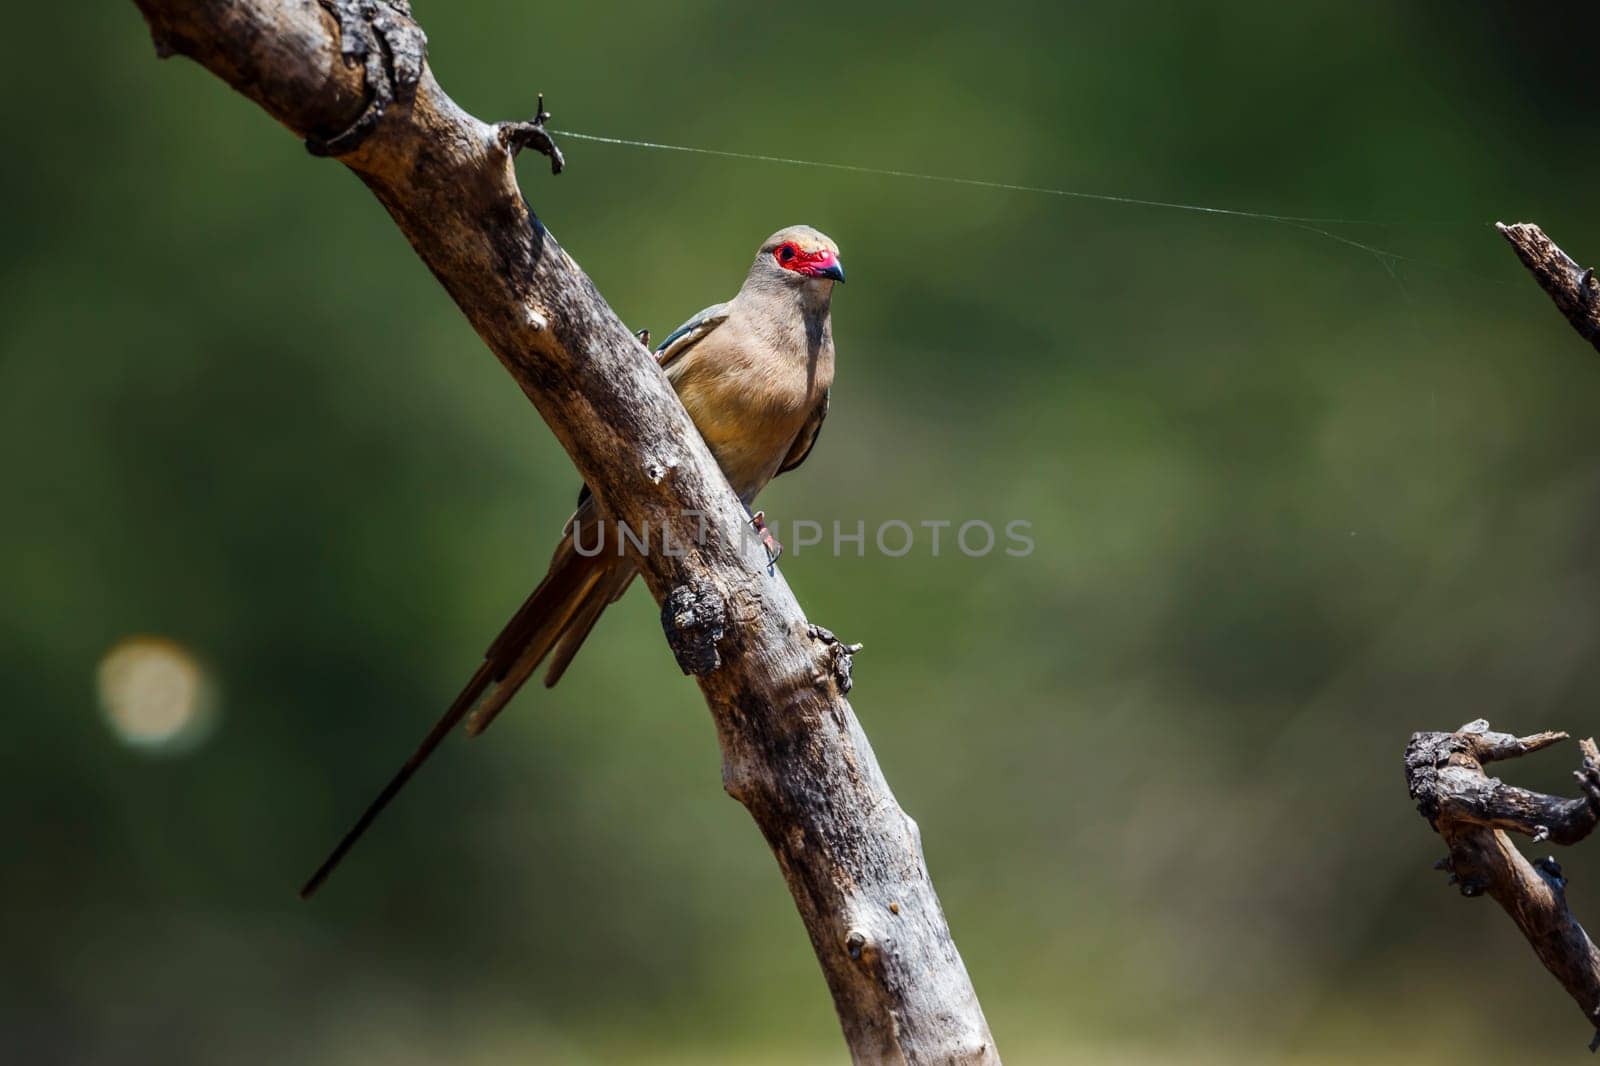 Red faced Mousebird standing on branch front view in Kruger National park, South Africa ; Specie Urocolius indicus family of Coliidae